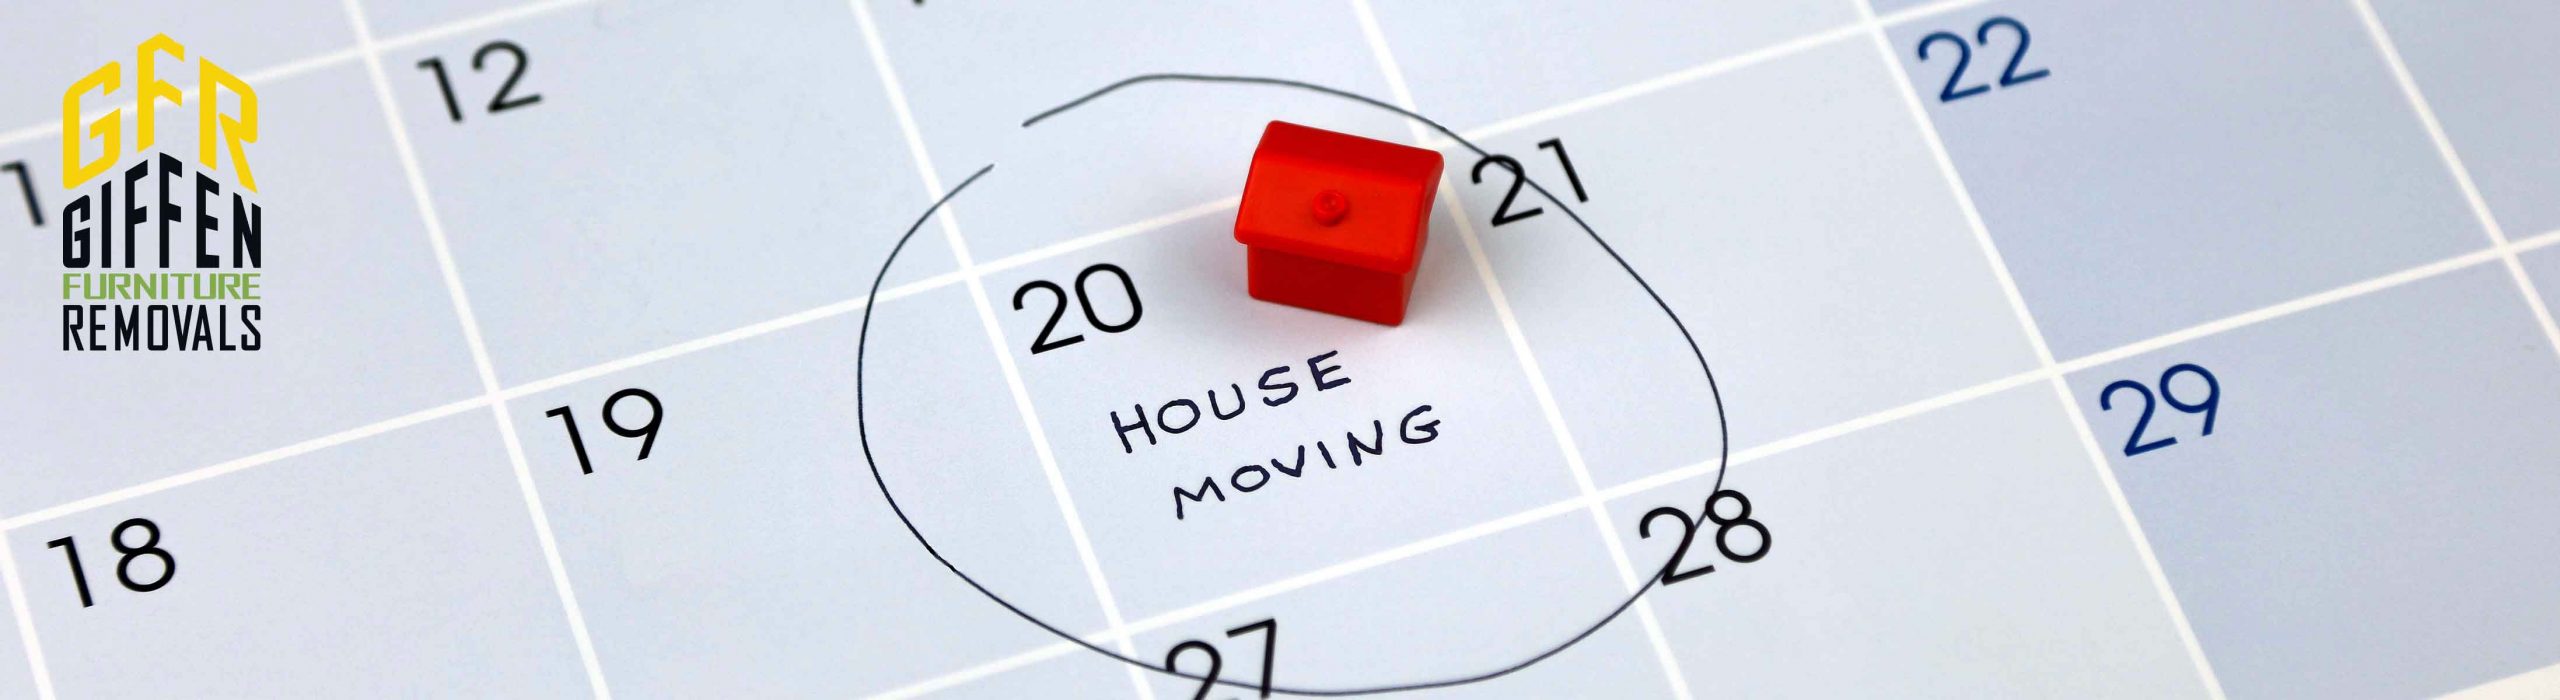 Giffen Furniture Removals When Is The Best Time To Move House?